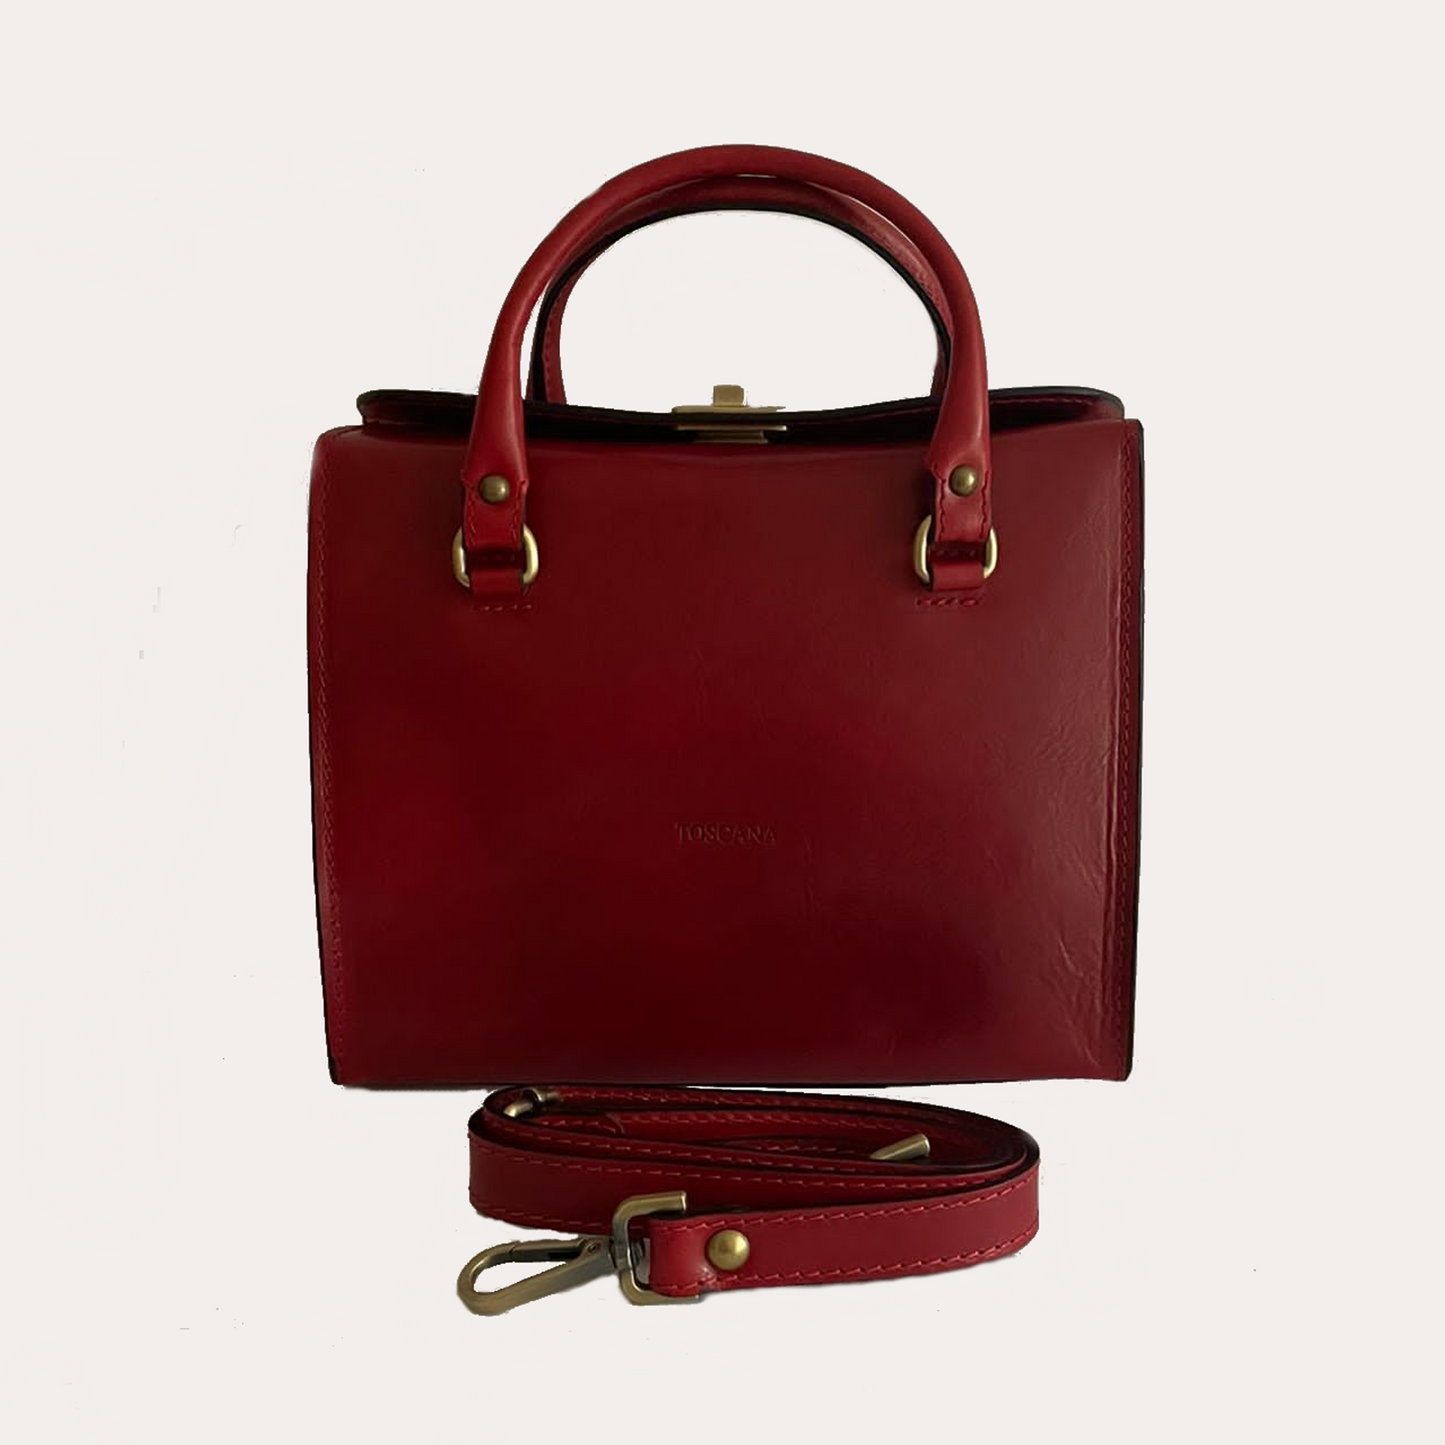 Red Leather Bag with Handles